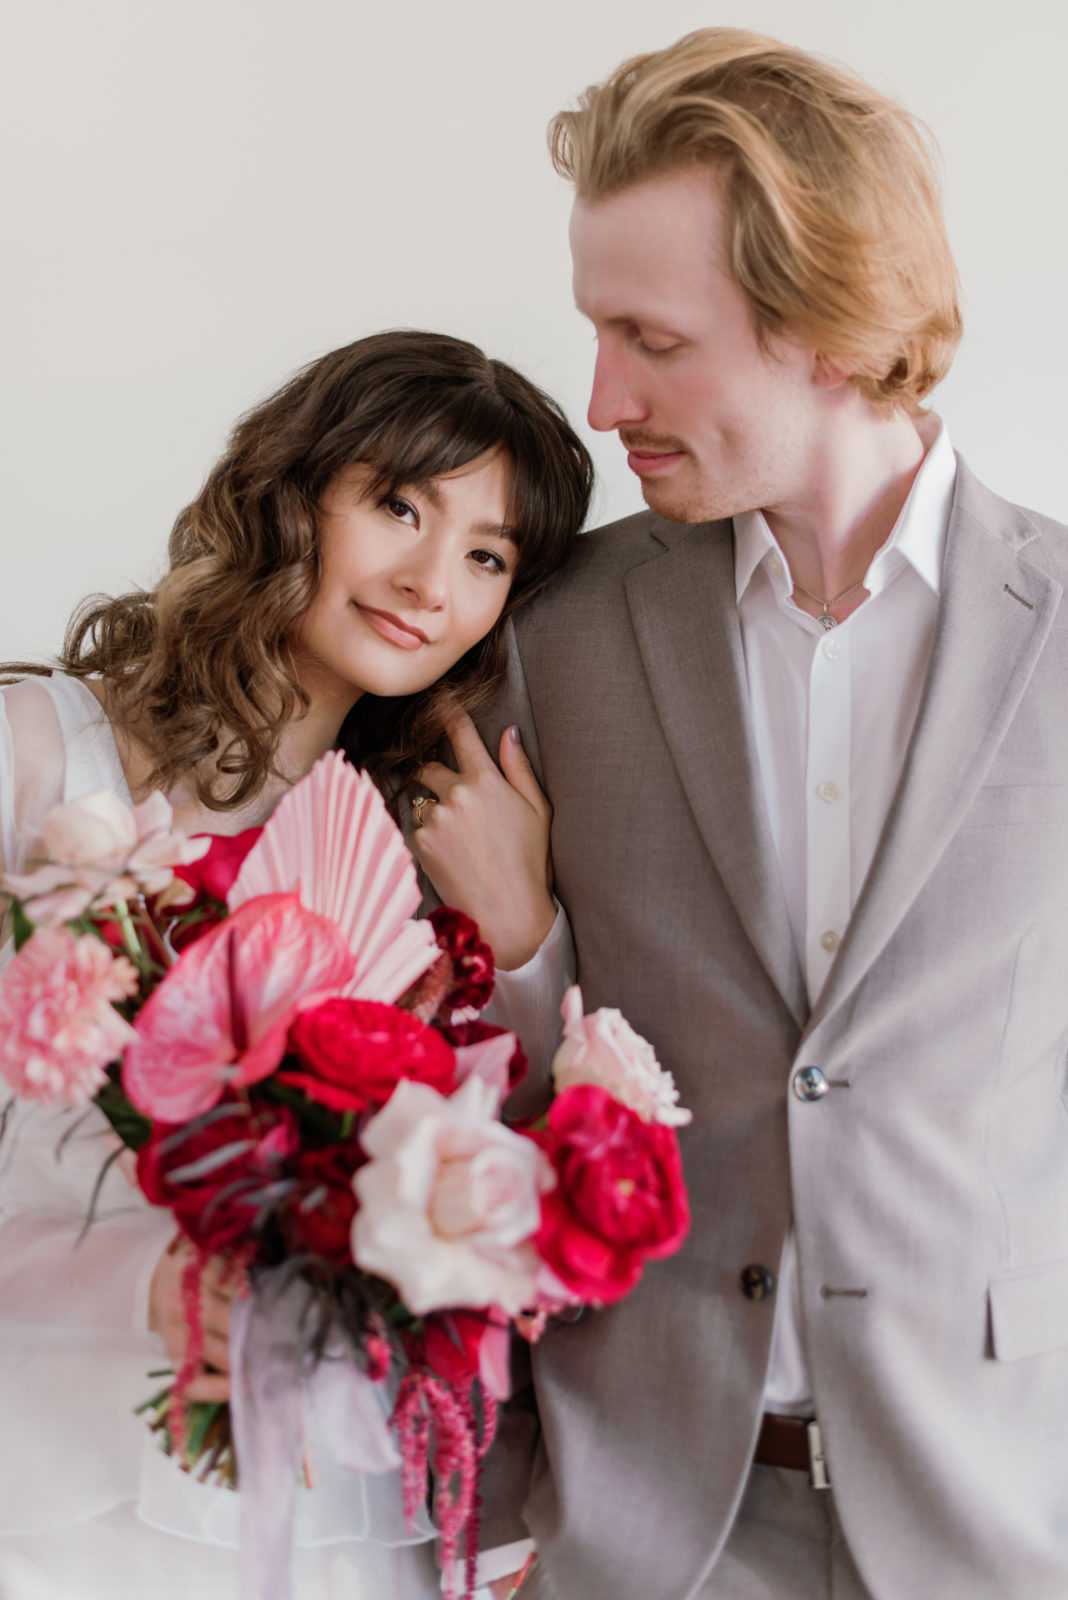 Bride and groom pose with a vibrant pink, red and white bridal bouquet